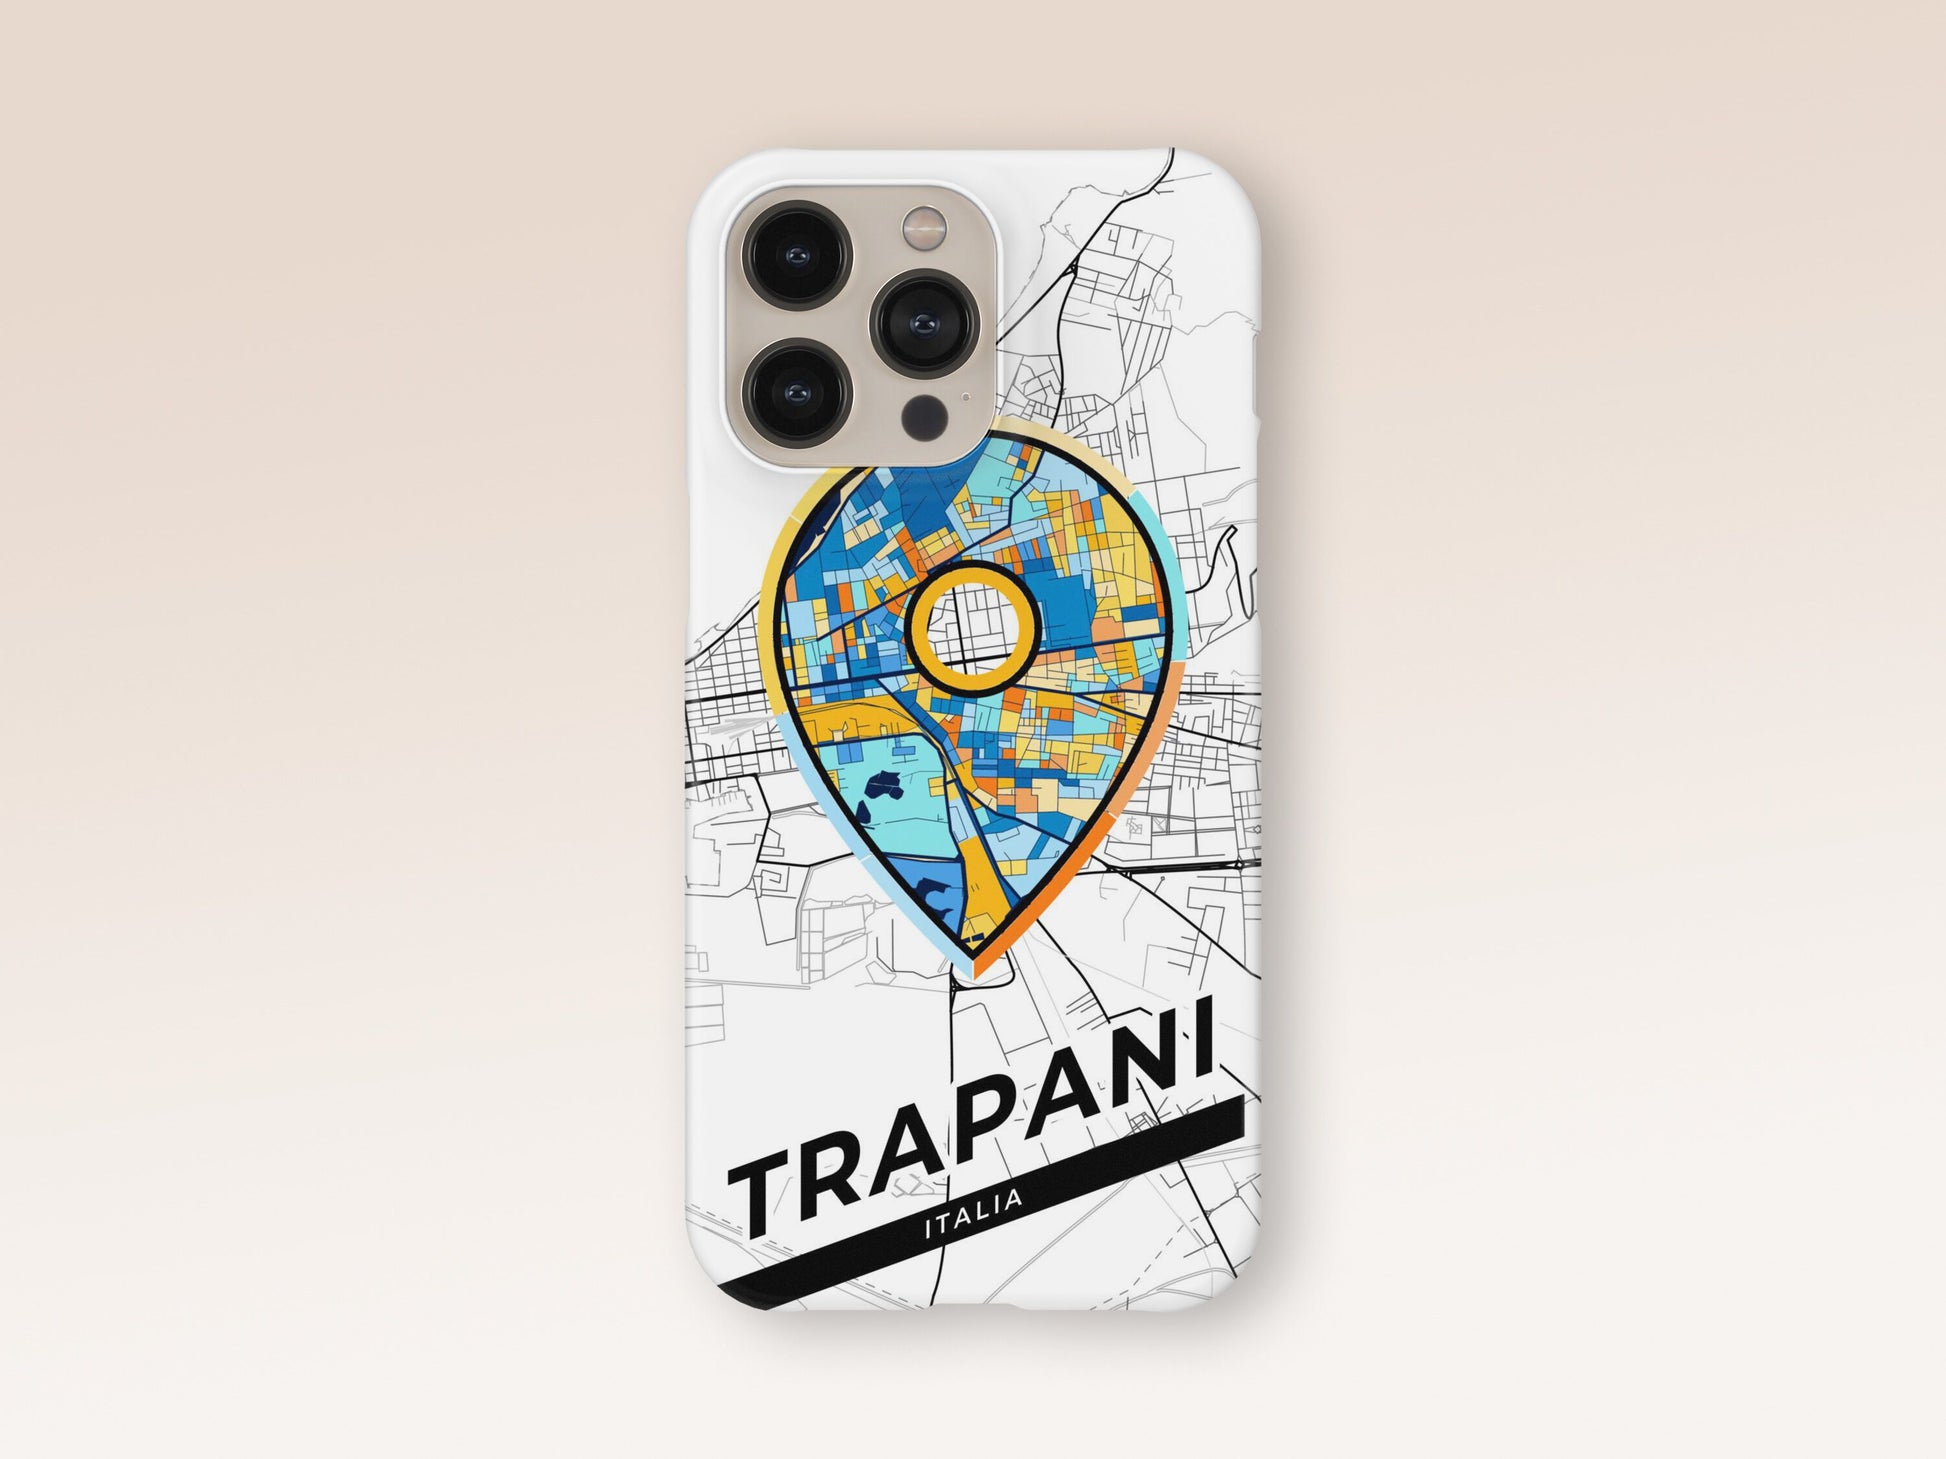 Trapani Italy slim phone case with colorful icon 1